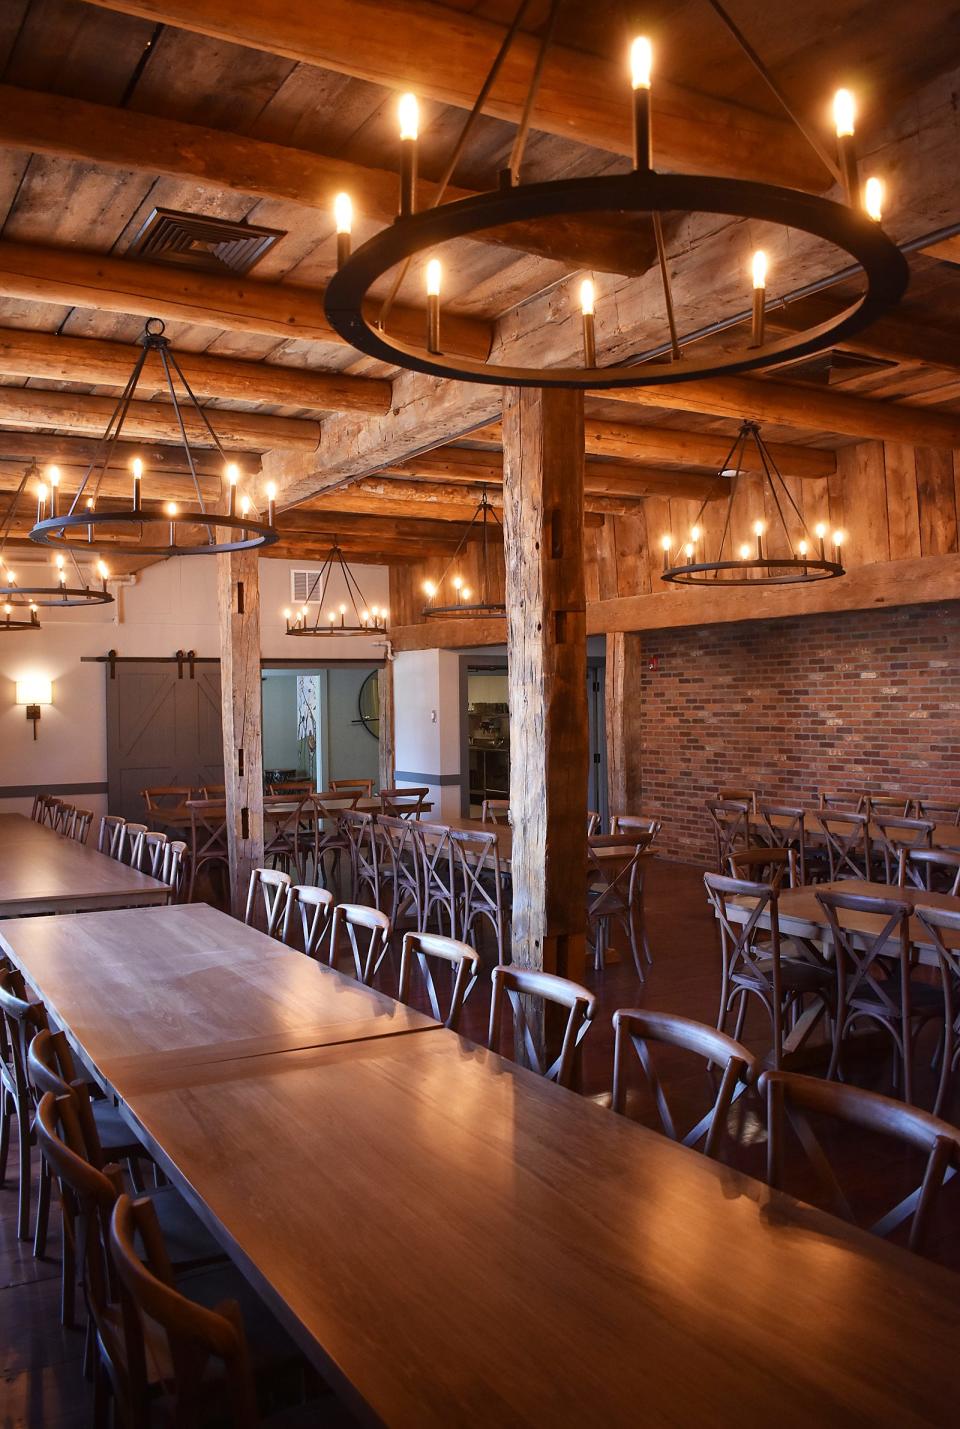 Events at the Aviary, headed by the owners of Aviary Restaurant, offers two events spaces, for smaller more intimate gatherings.